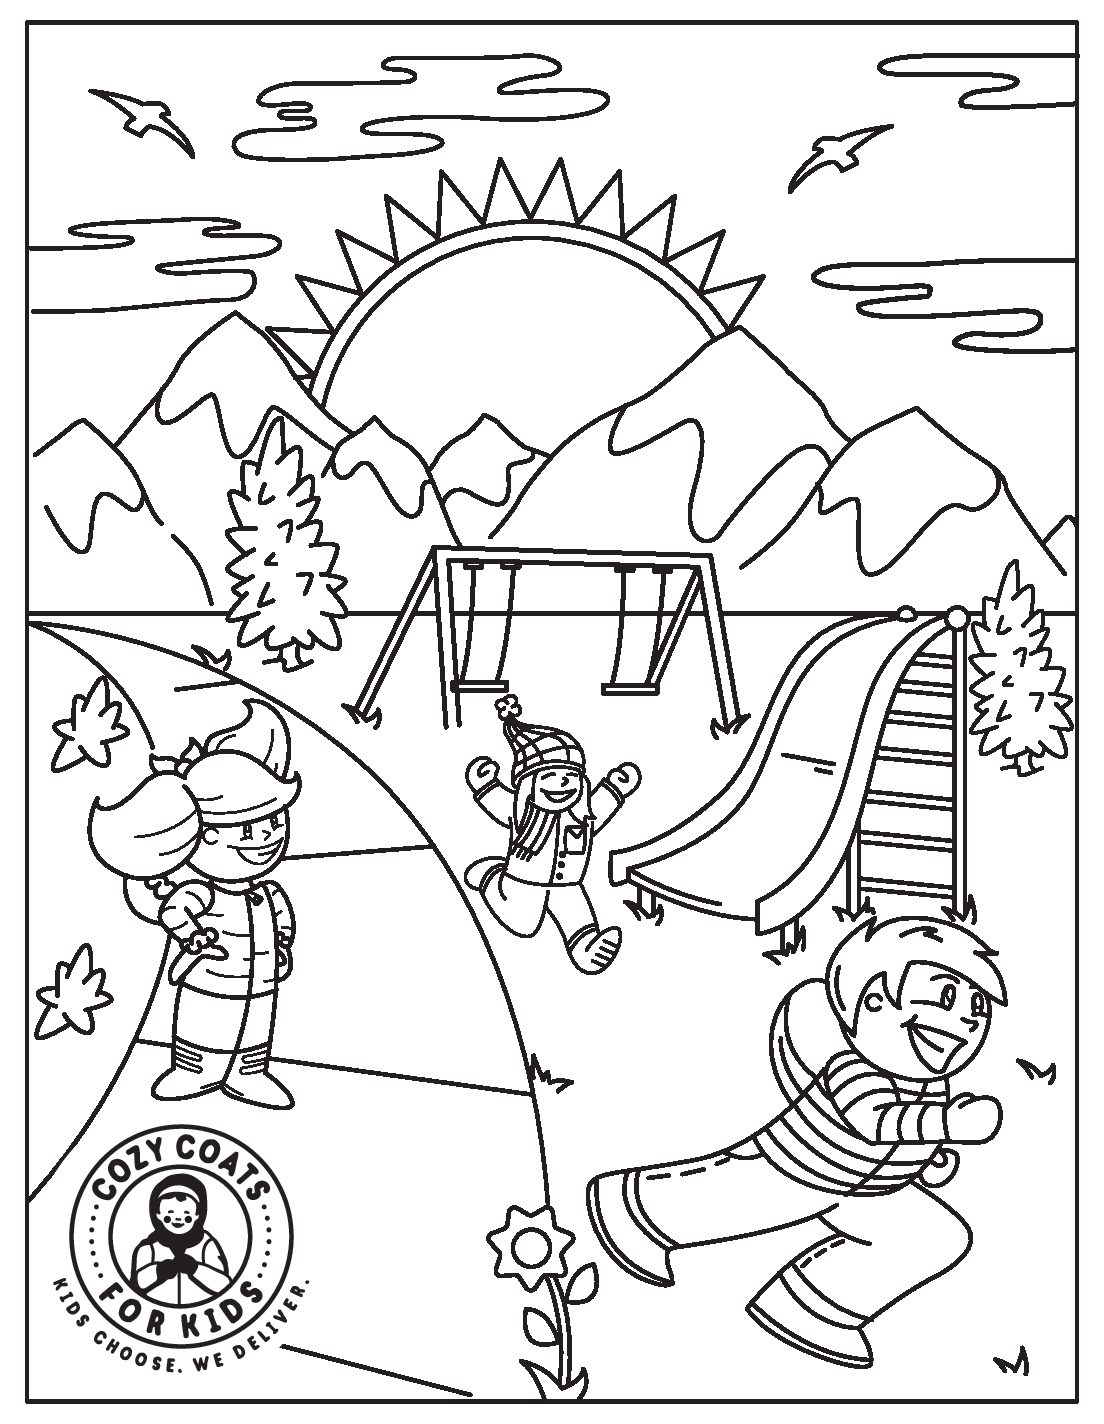 Free Downloadable Coloring Sheet for Children   Cozy Coats for Kids